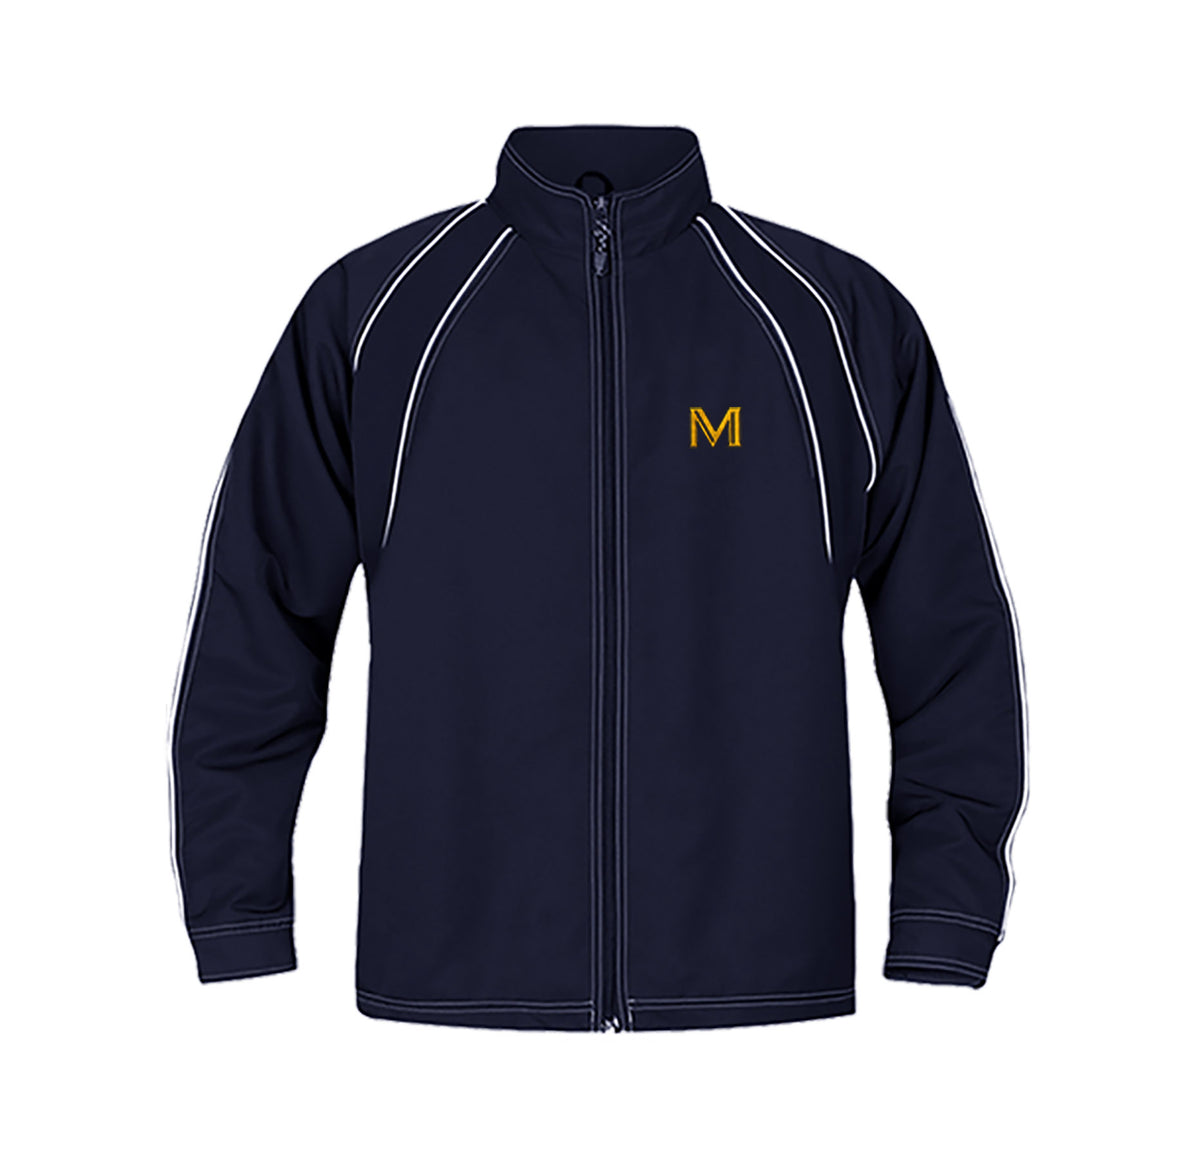 MULGRAVE TRACK JACKET WITH NAME EMBROIDERY, TWILL, YOUTH *FINAL SALE*